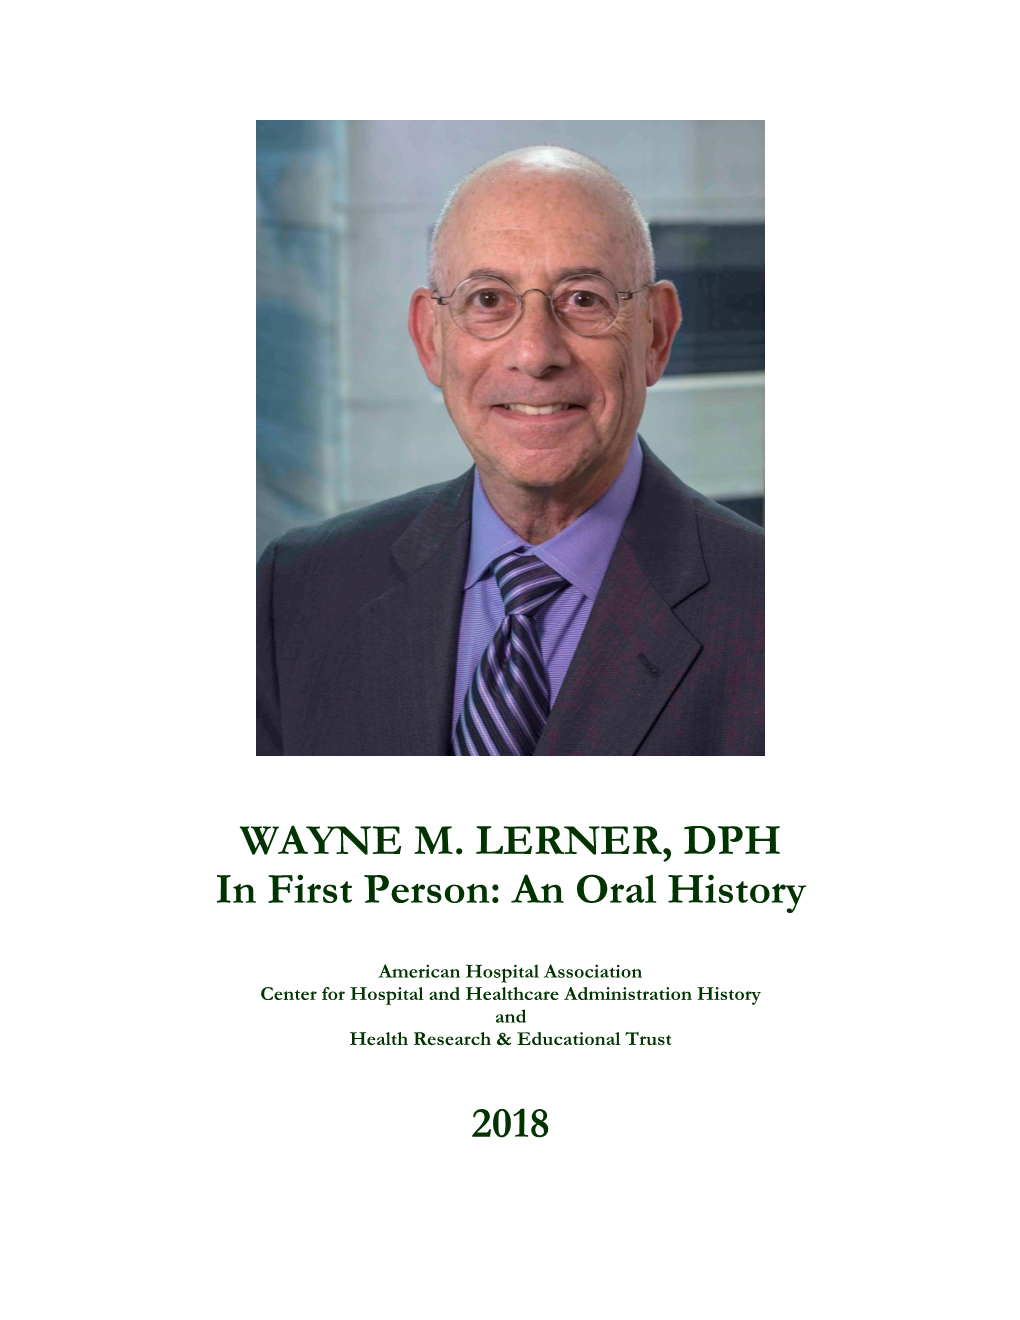 WAYNE M. LERNER, DPH in First Person: an Oral History